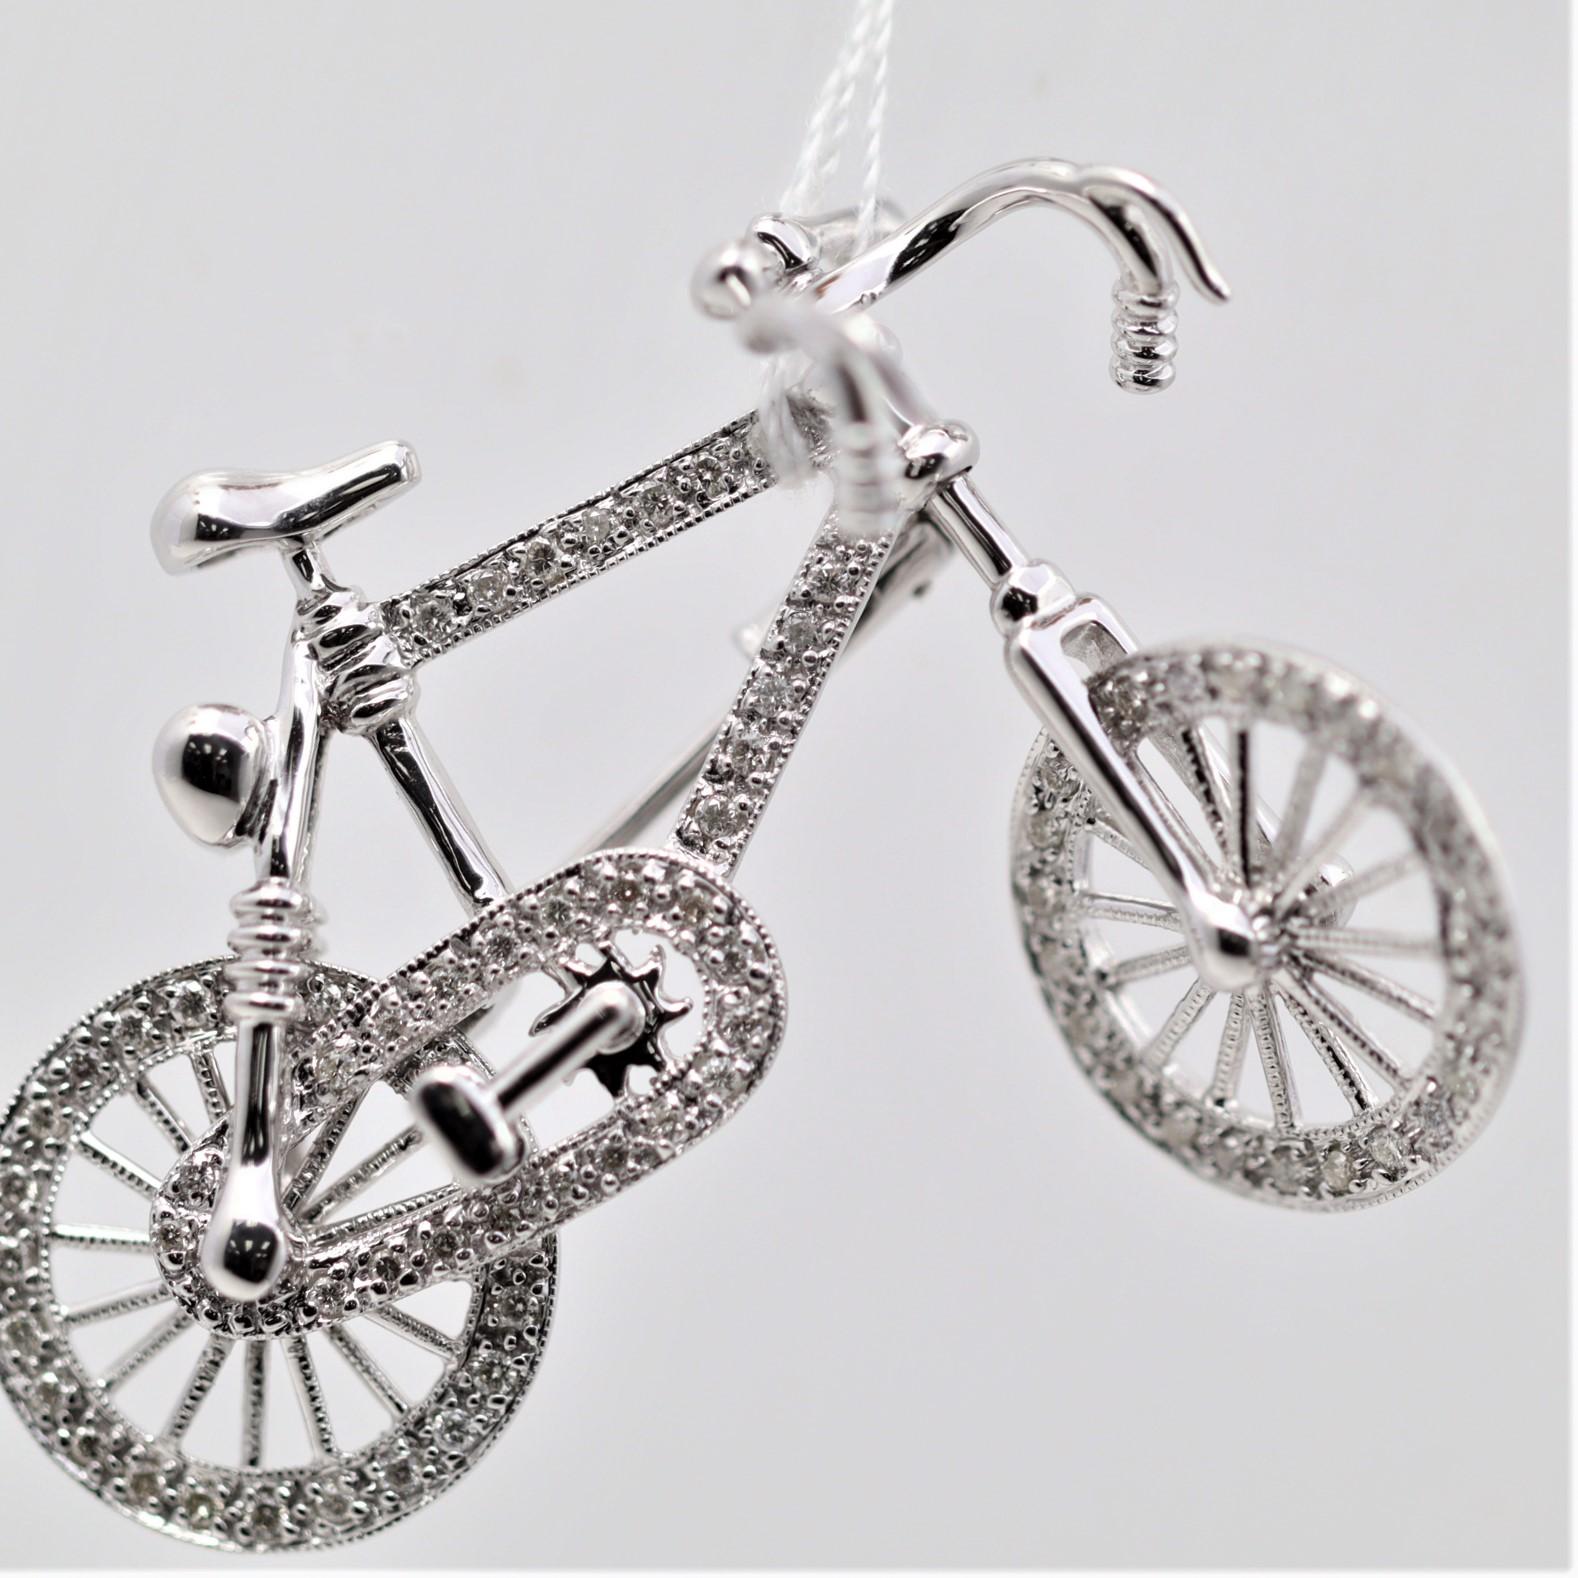 A cute pin made in 18k white gold in the form of a bicycle! Both of the bicycle wheels spin freely and the handlebars turn side to side as well. The bike is studded with 0.45 carats of diamonds taking it to the next level. Made in 18k white gold and